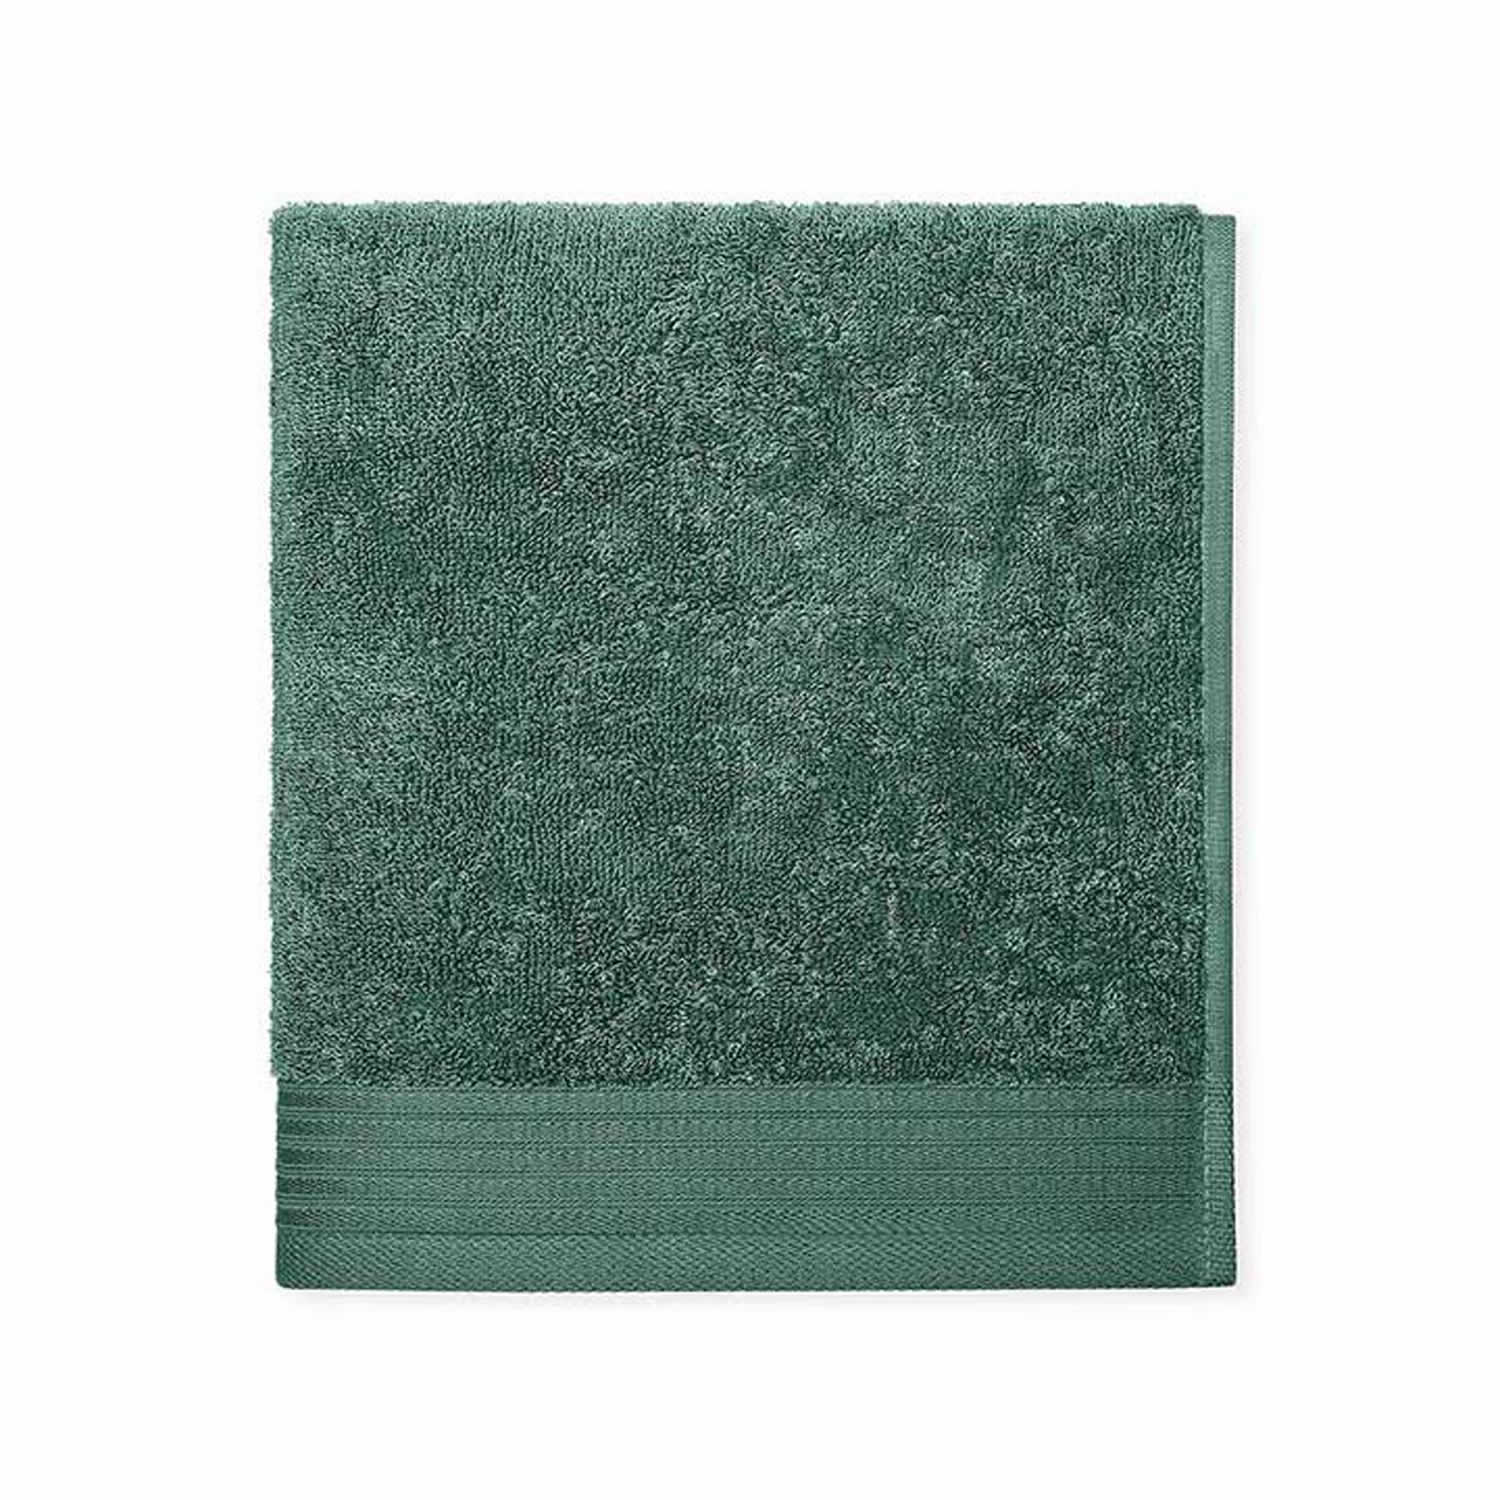 Schlossberg COSHMERE towel - Thyme